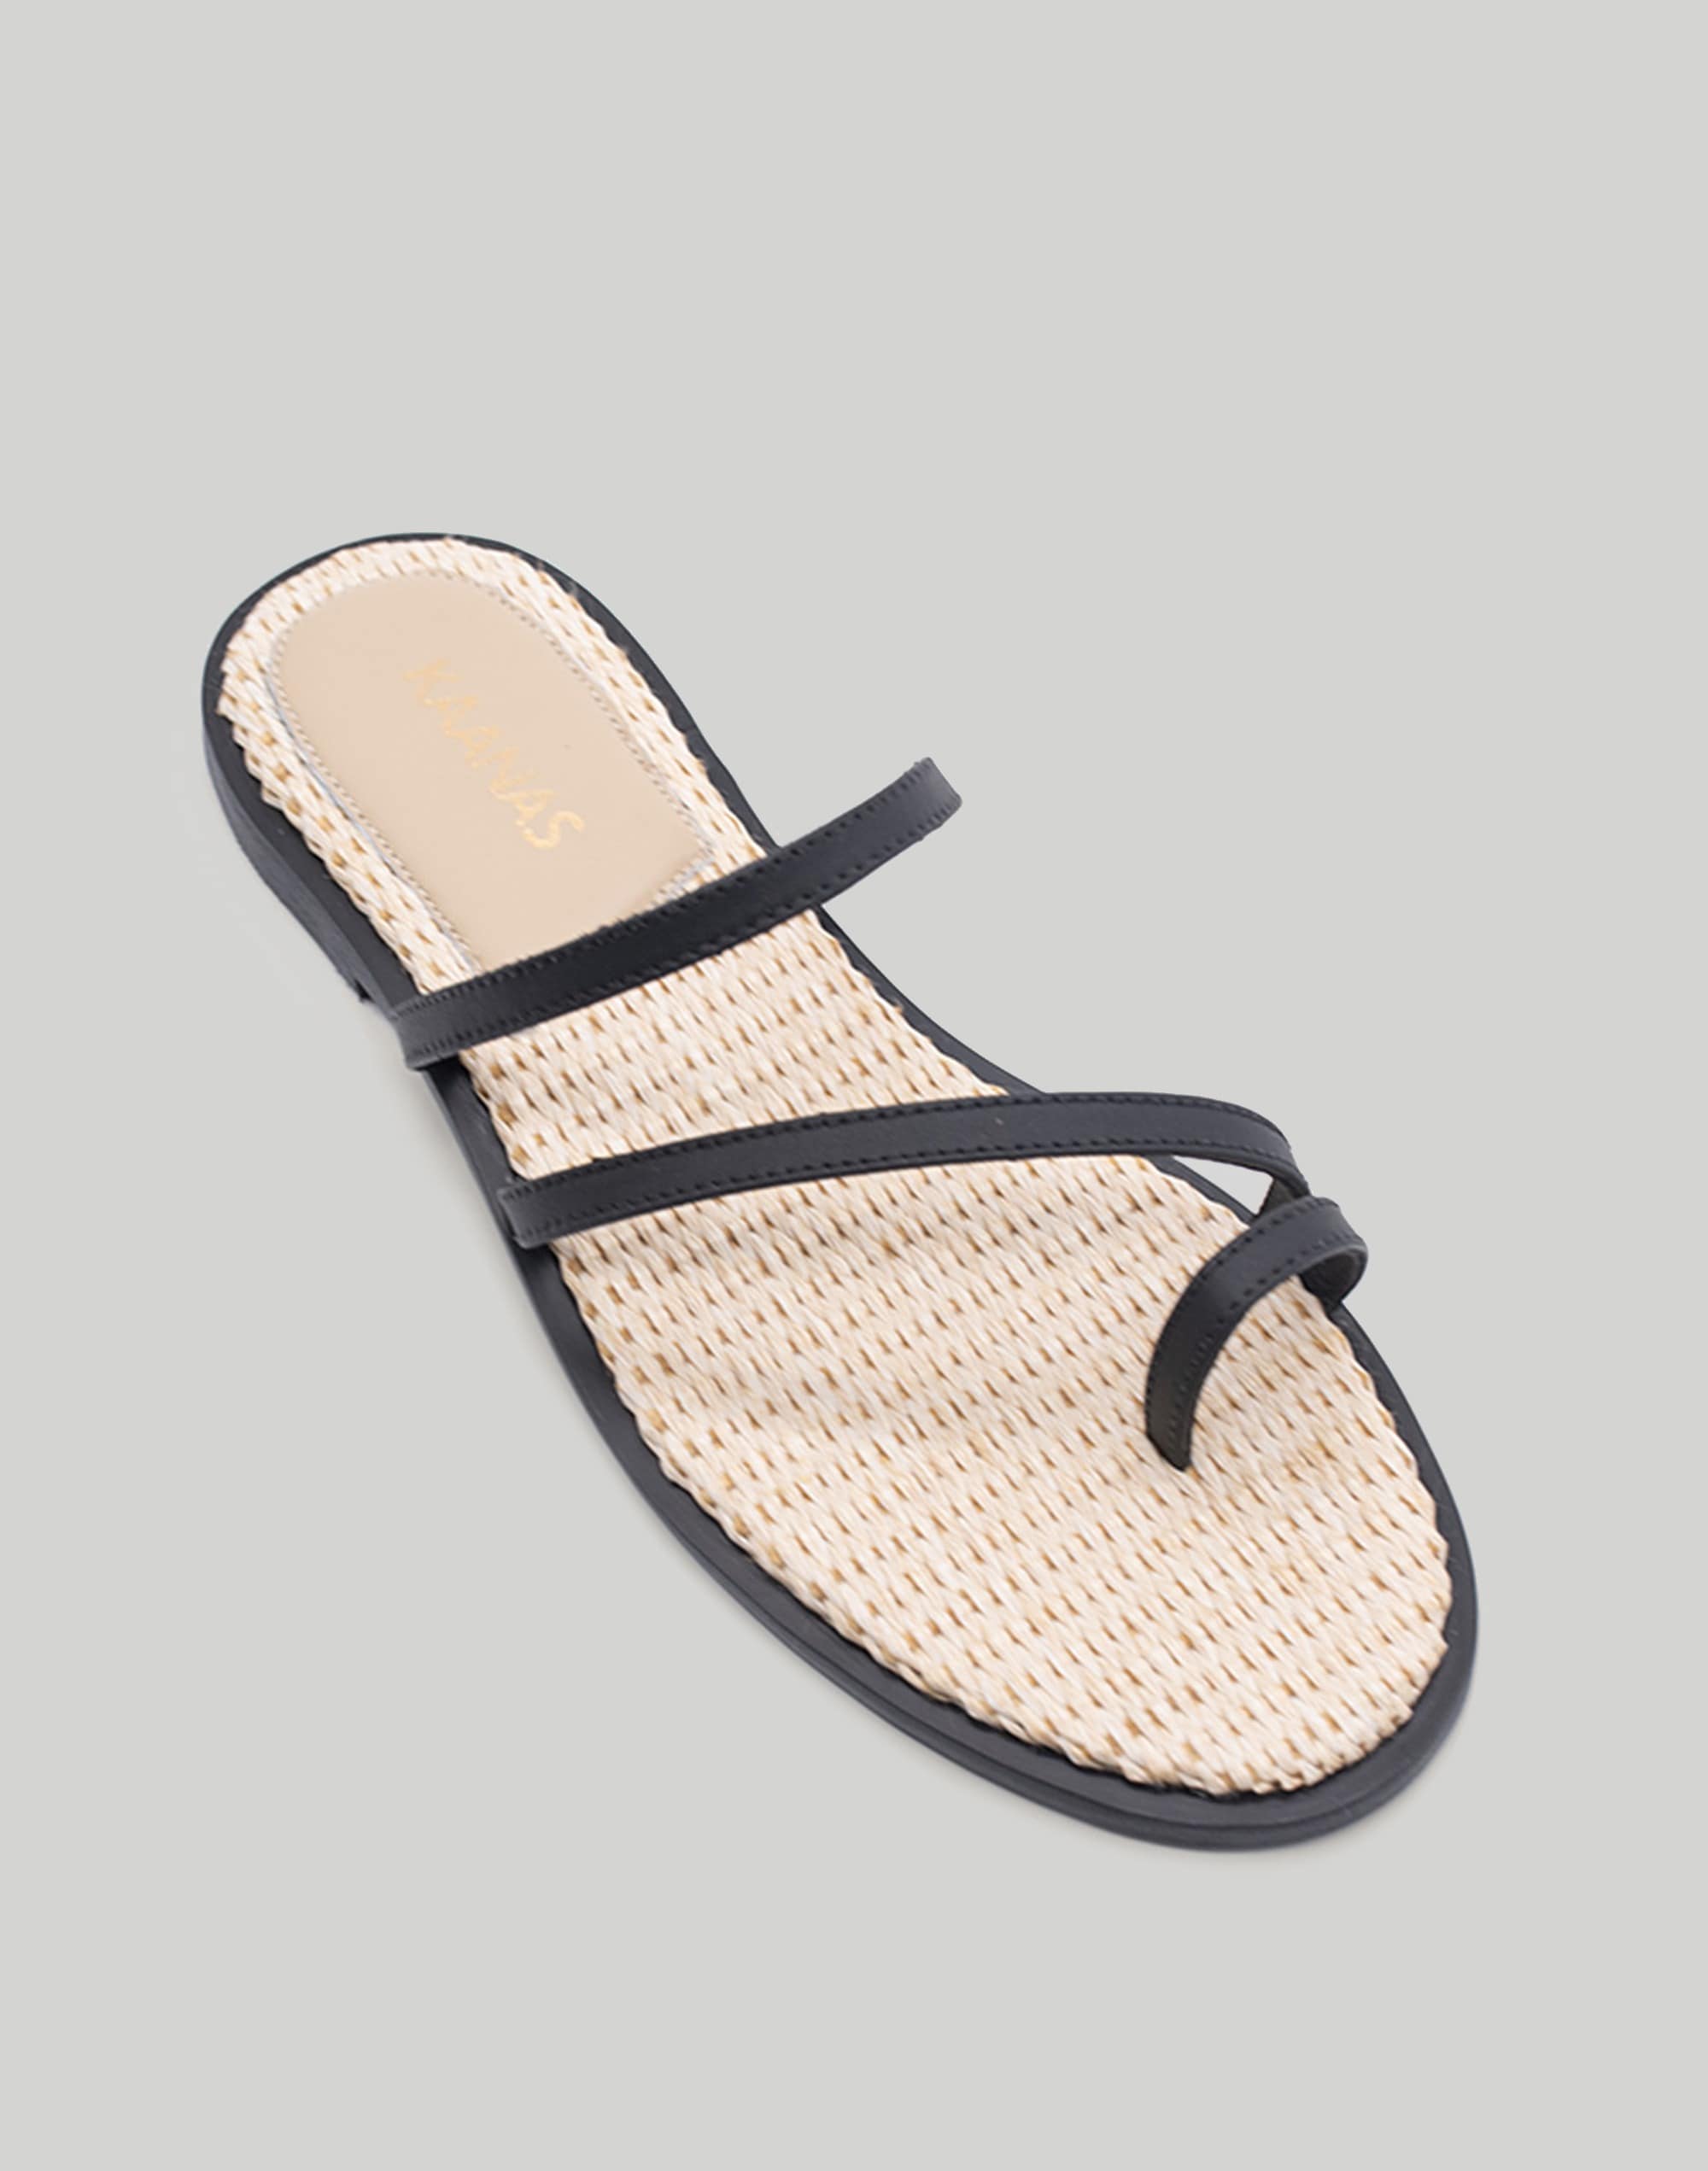 KAANAS Azores Naked Slide Sandals